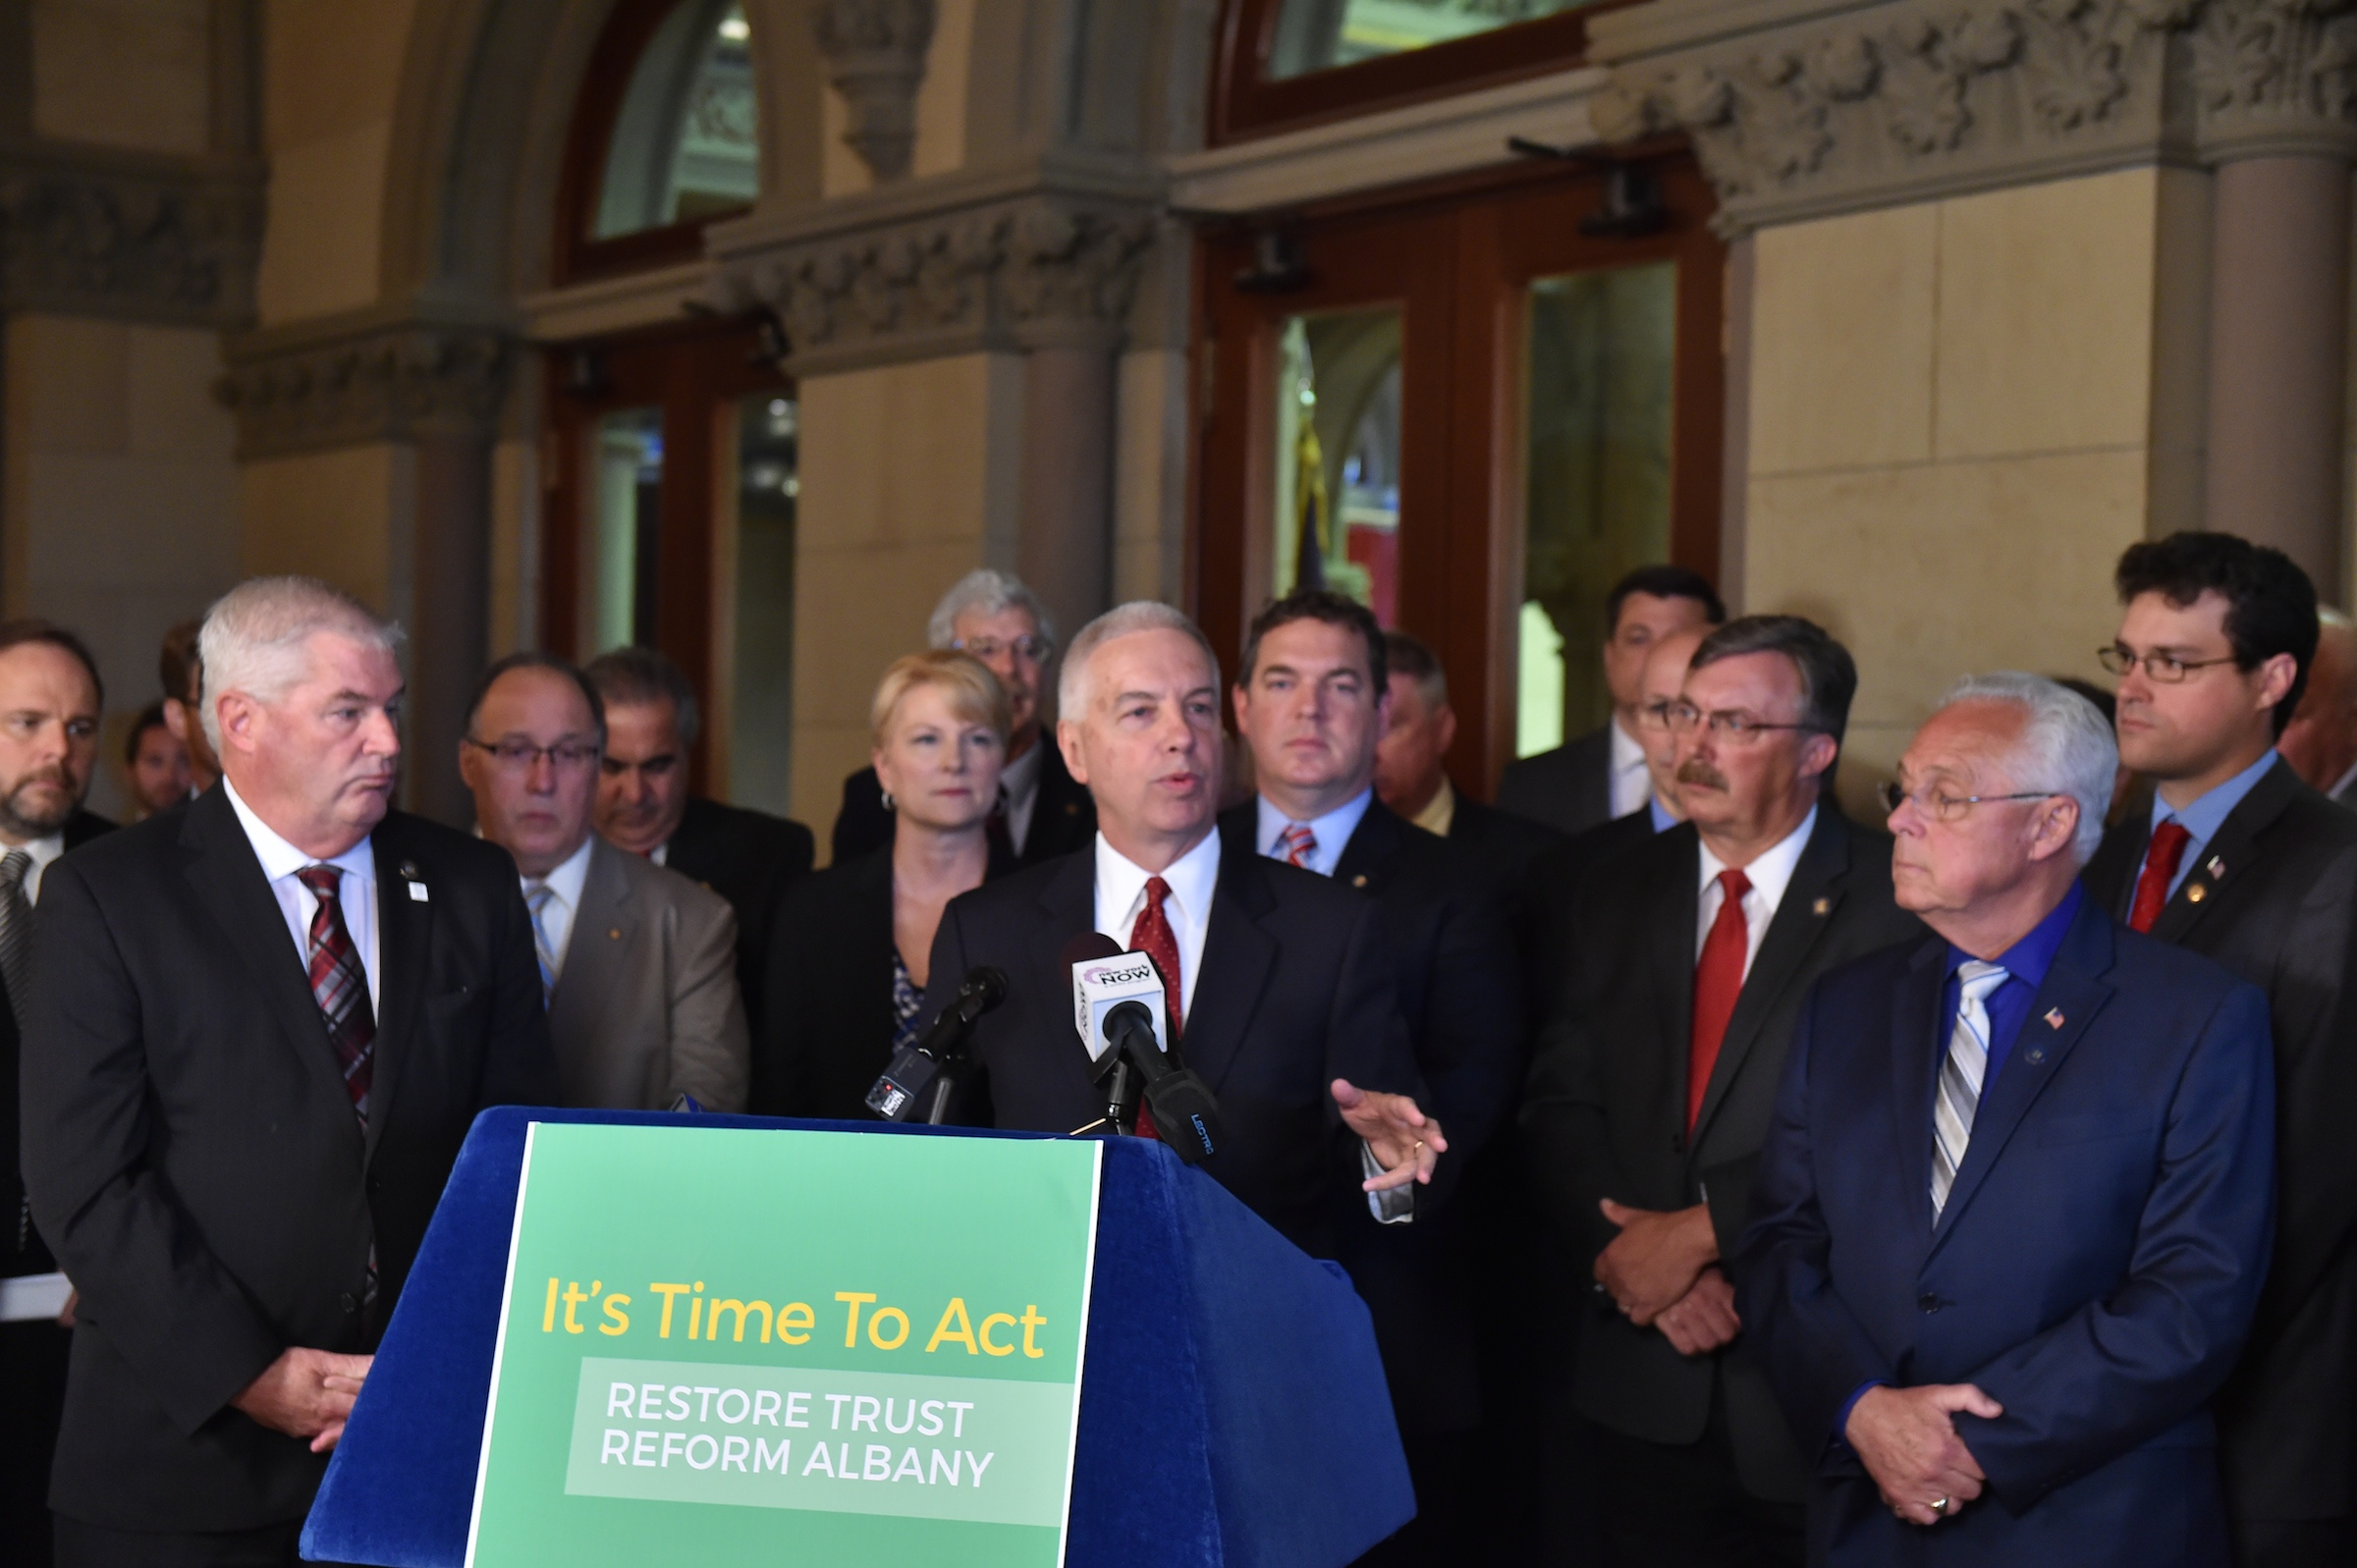 Assemblyman Miller and other members of the Assembly Minority Conference at today's press conference.